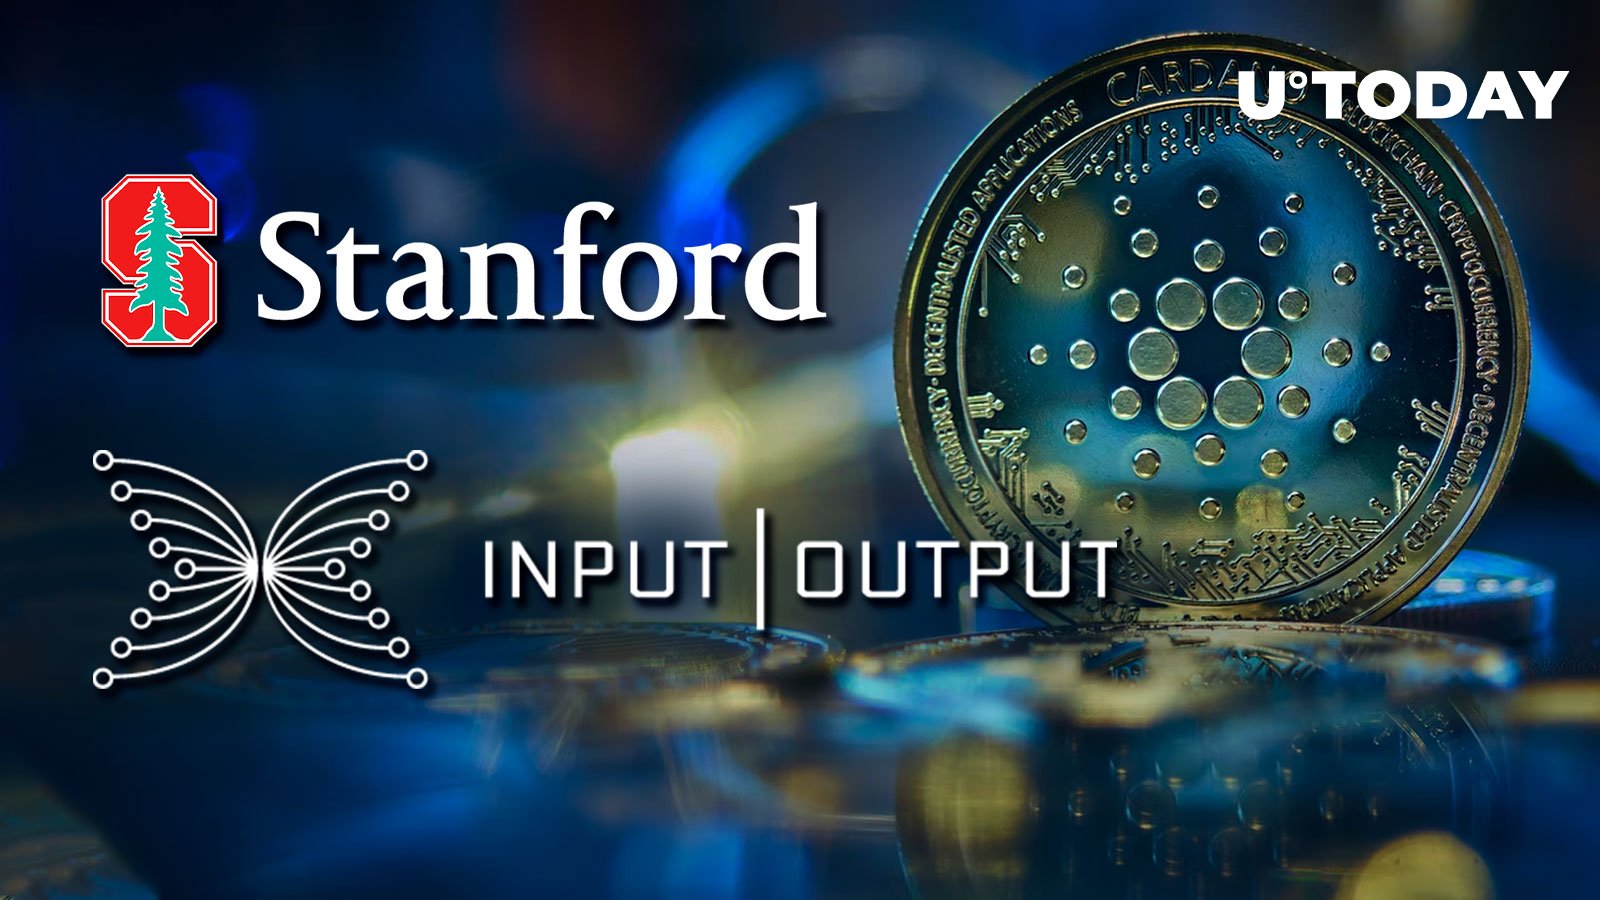 Cardano’s Input Output Announces Research Hub at Stanford